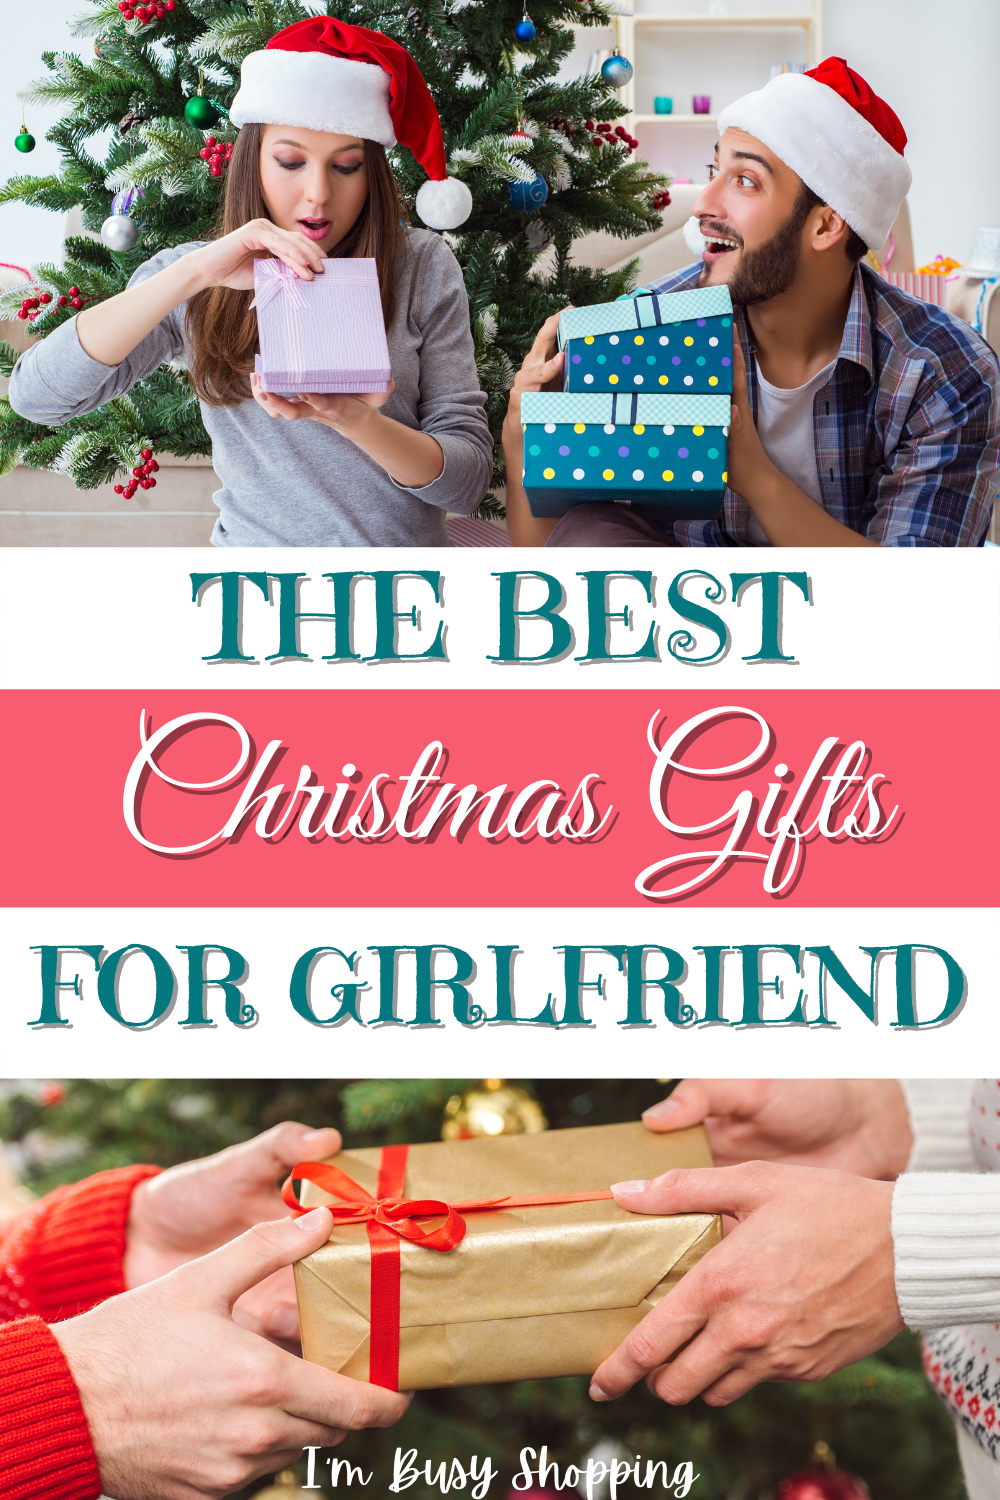 Pin showing the Best Christmas Gifts for Girlfriend